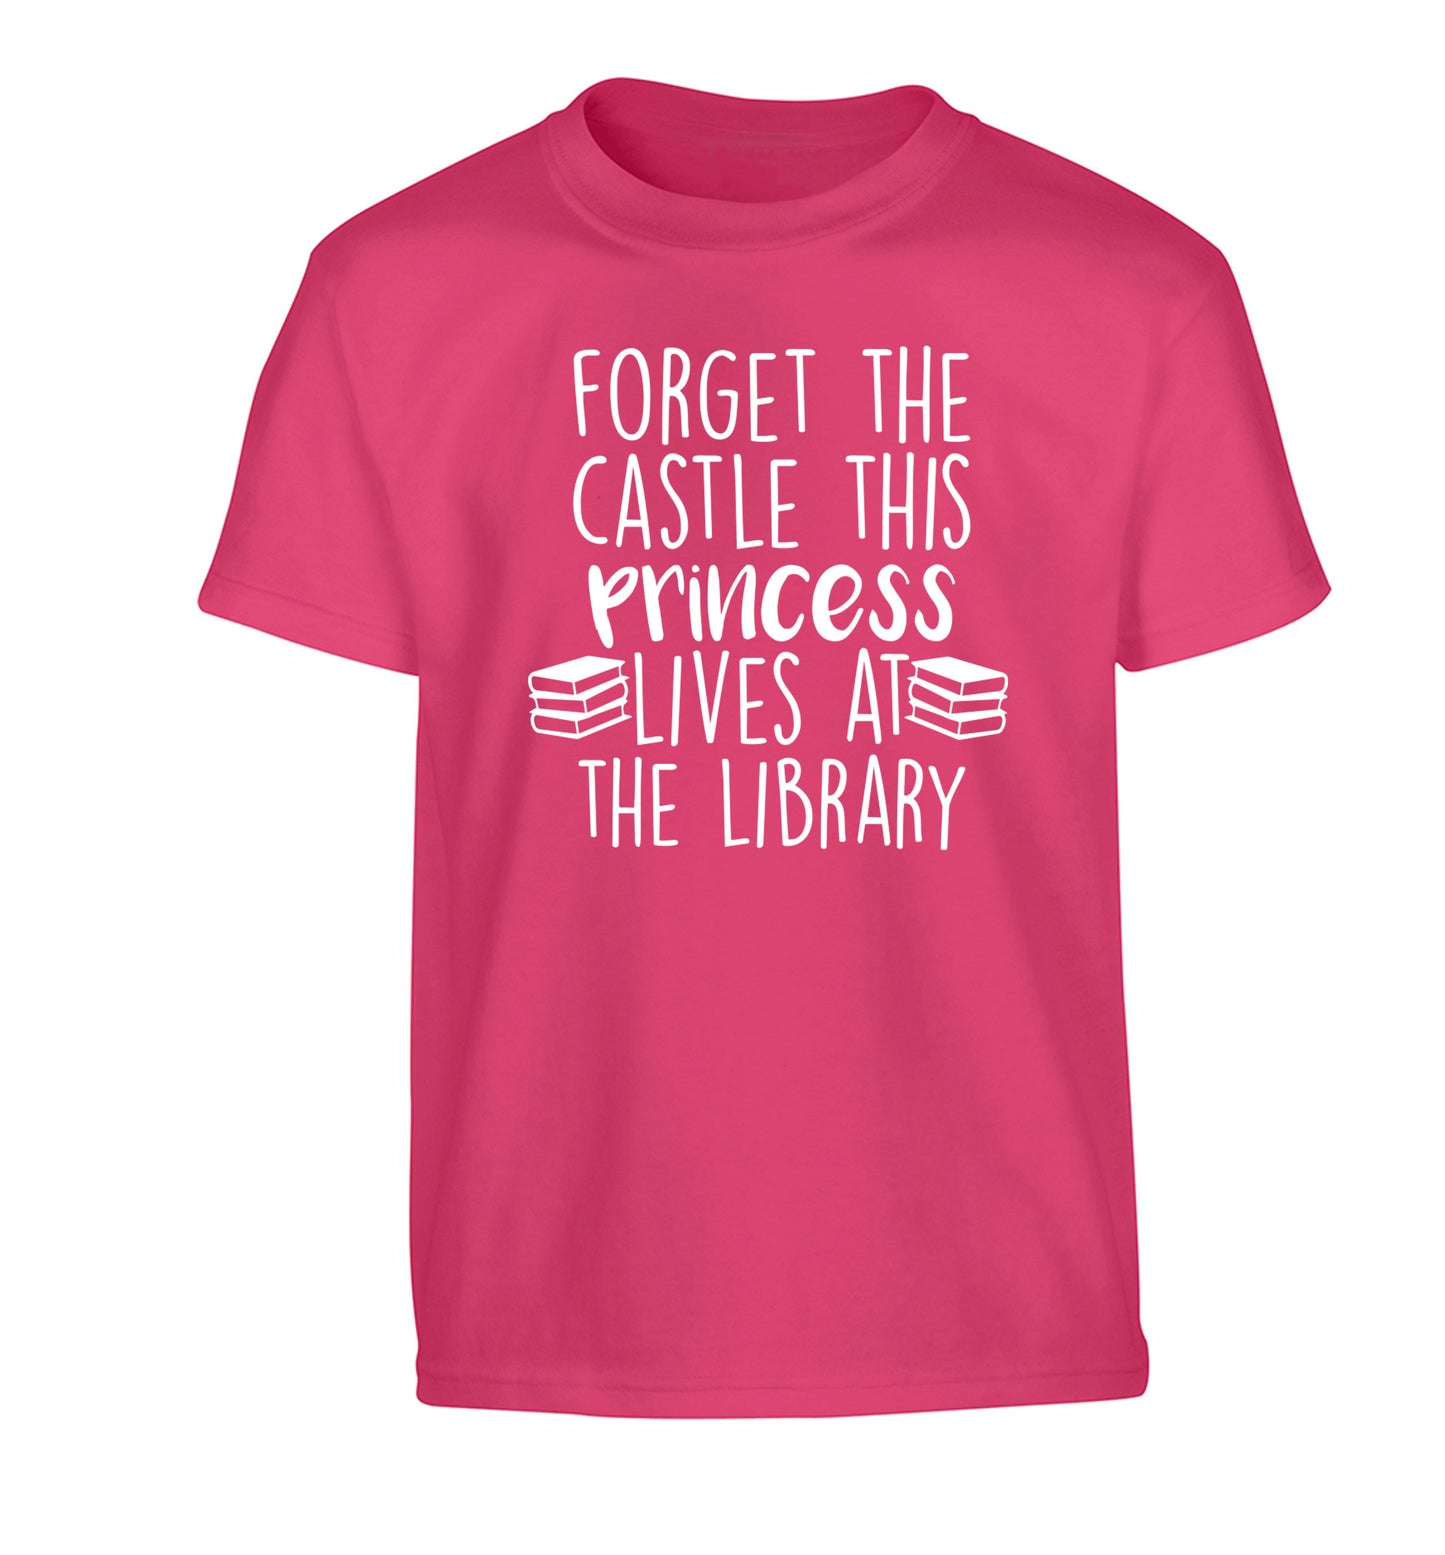 Forget the castle this princess lives at the library Children's pink Tshirt 12-14 Years